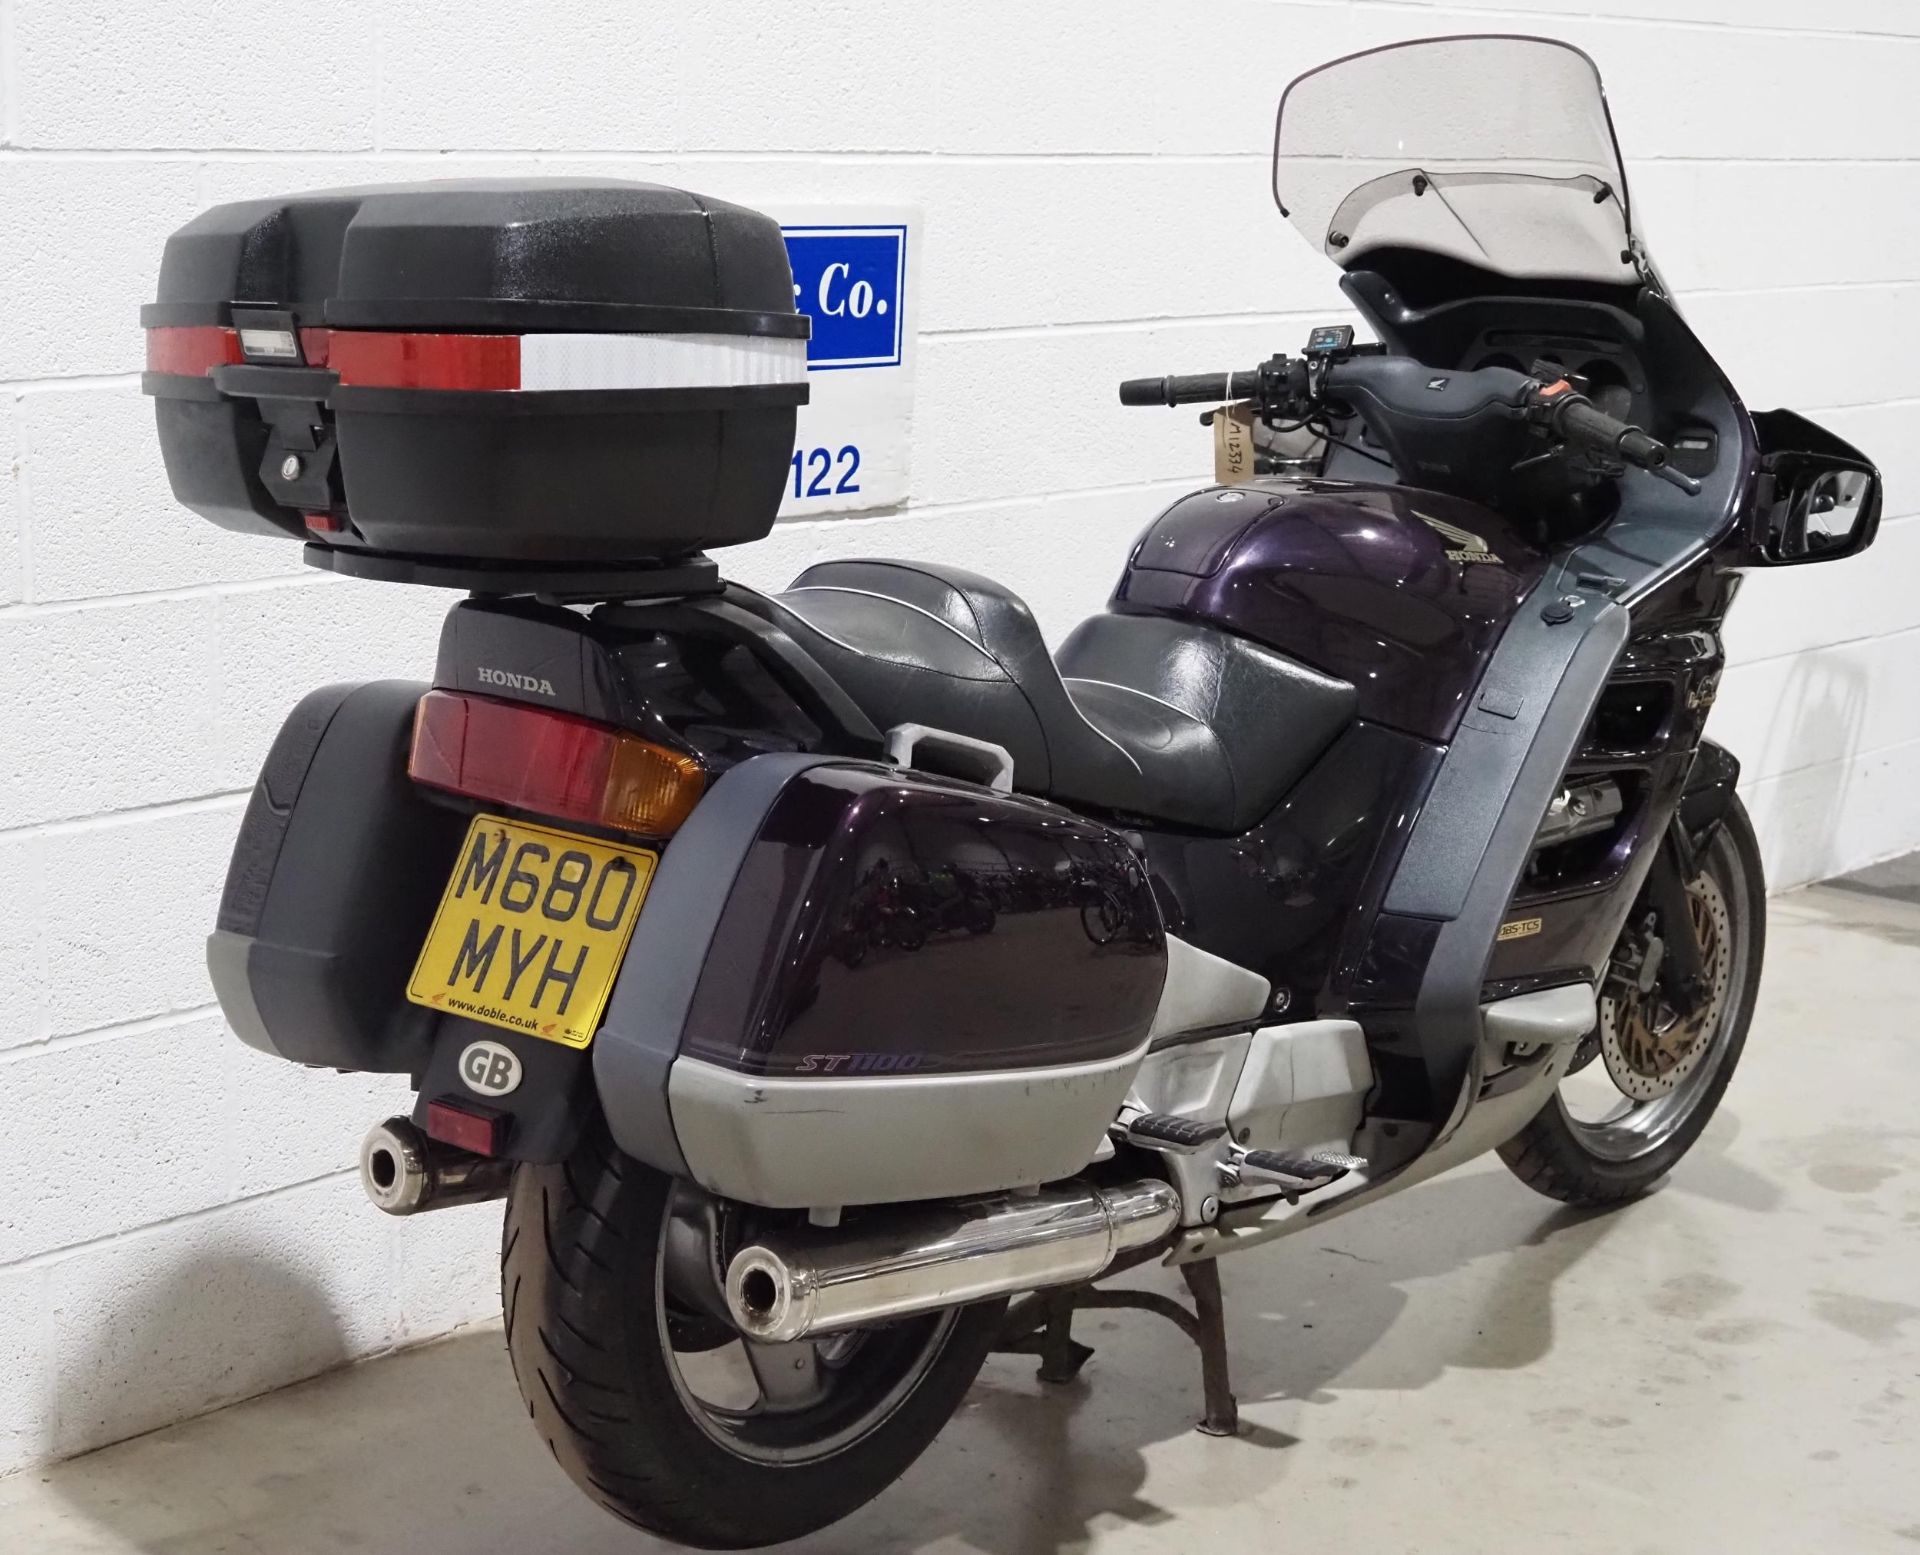 Honda ST1100 motorcycle. 1995. 1084cc. Runs and rides. MOT until 25.04.25 and comes with MOT test - Image 3 of 6